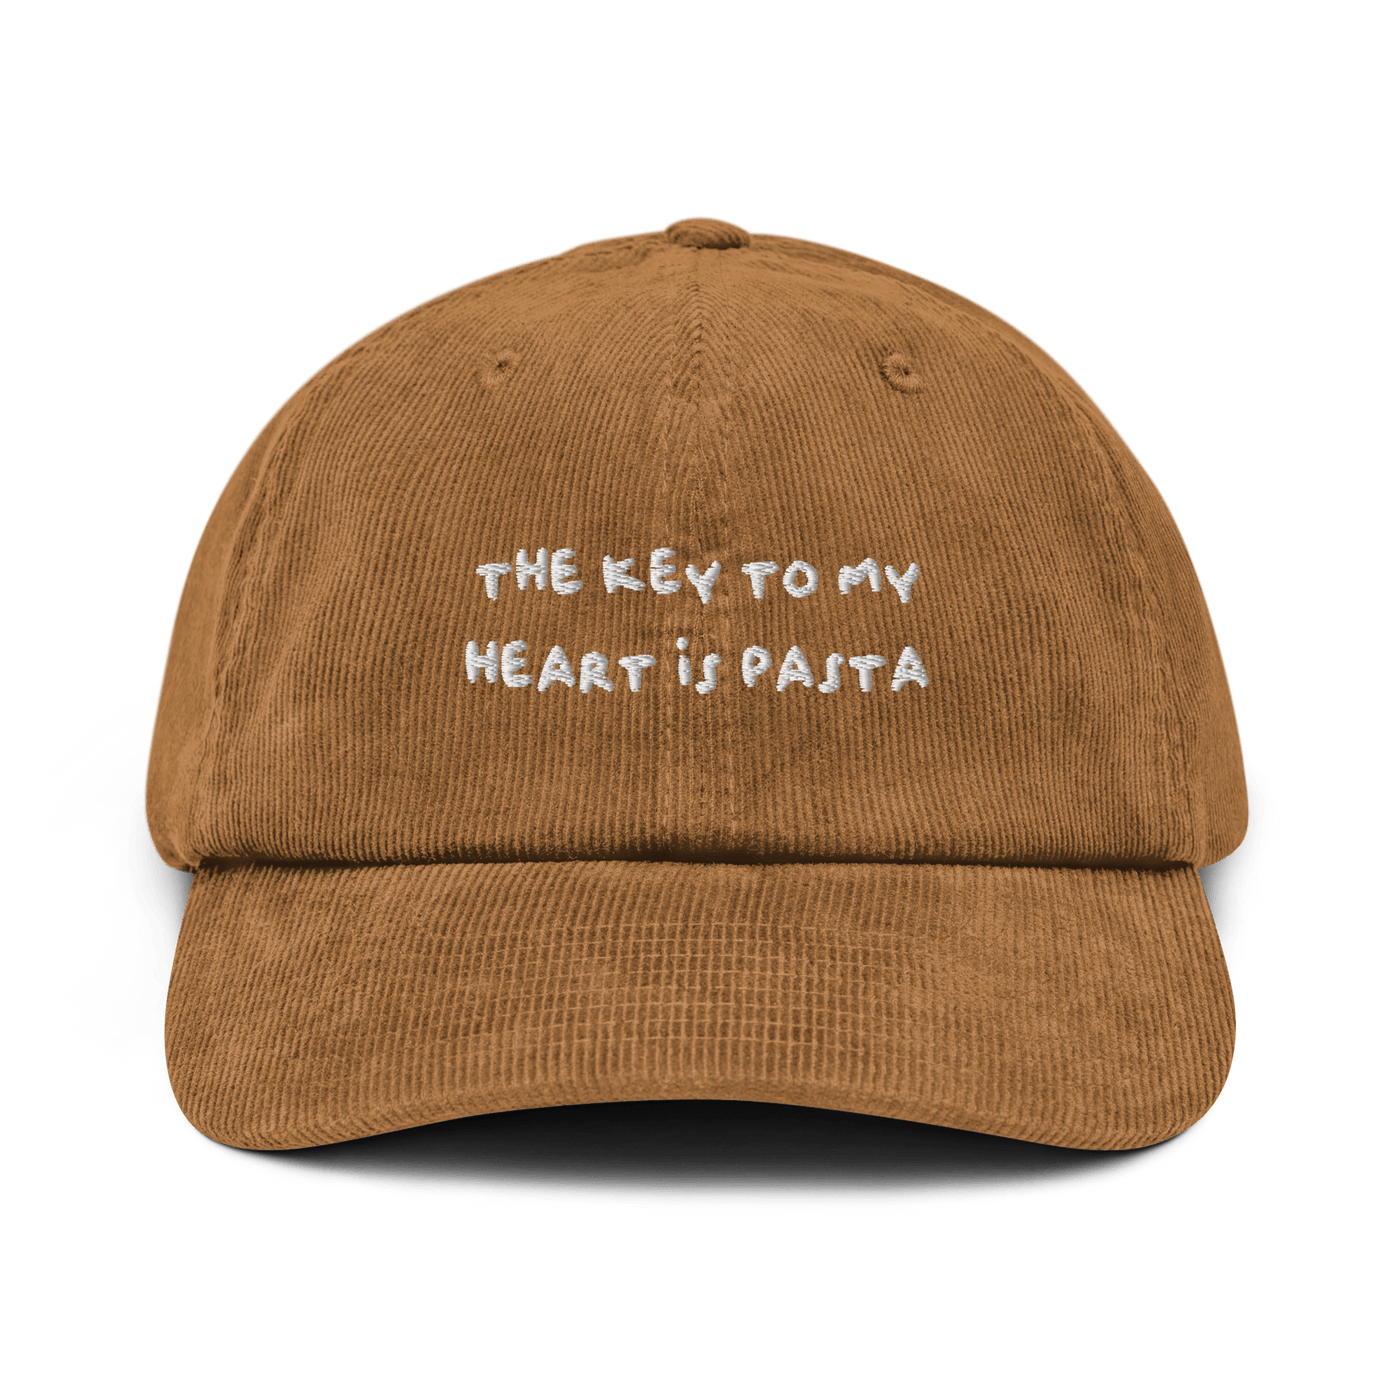 Corduroy hat - Camel - - Just Another Cap Store